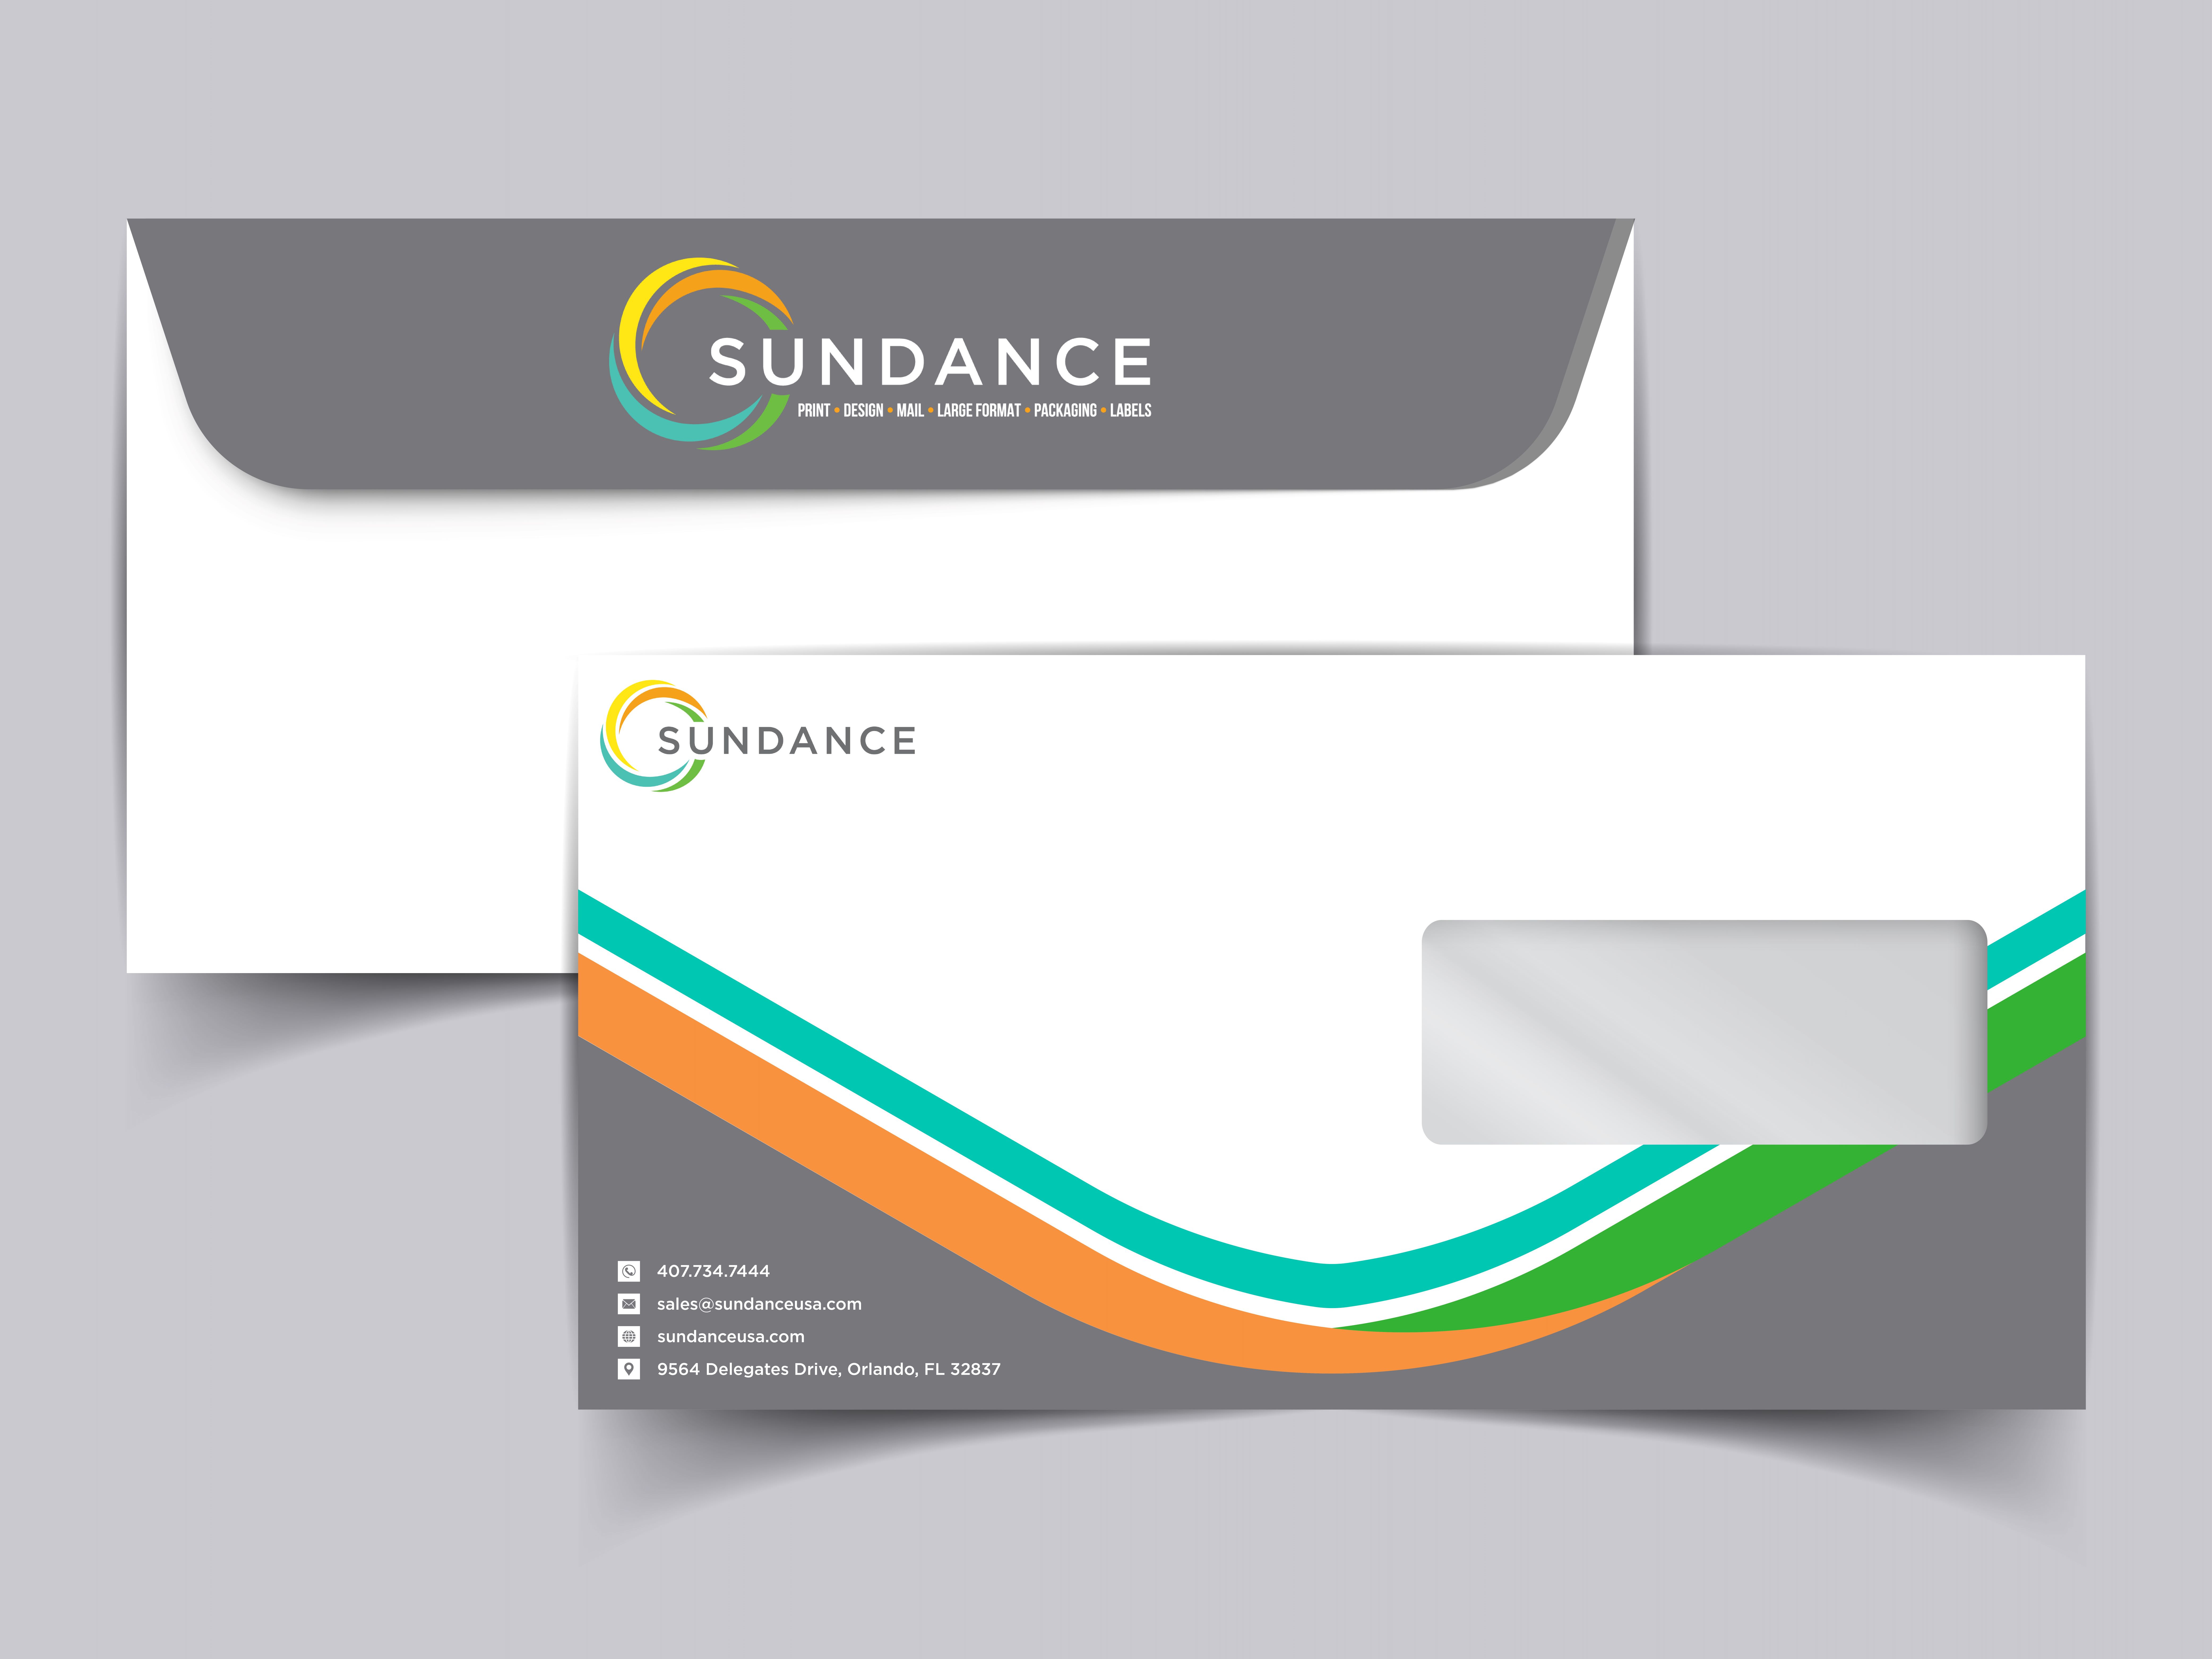 Direct Mail: Get Top Results with Full-Color Printed Envelopes